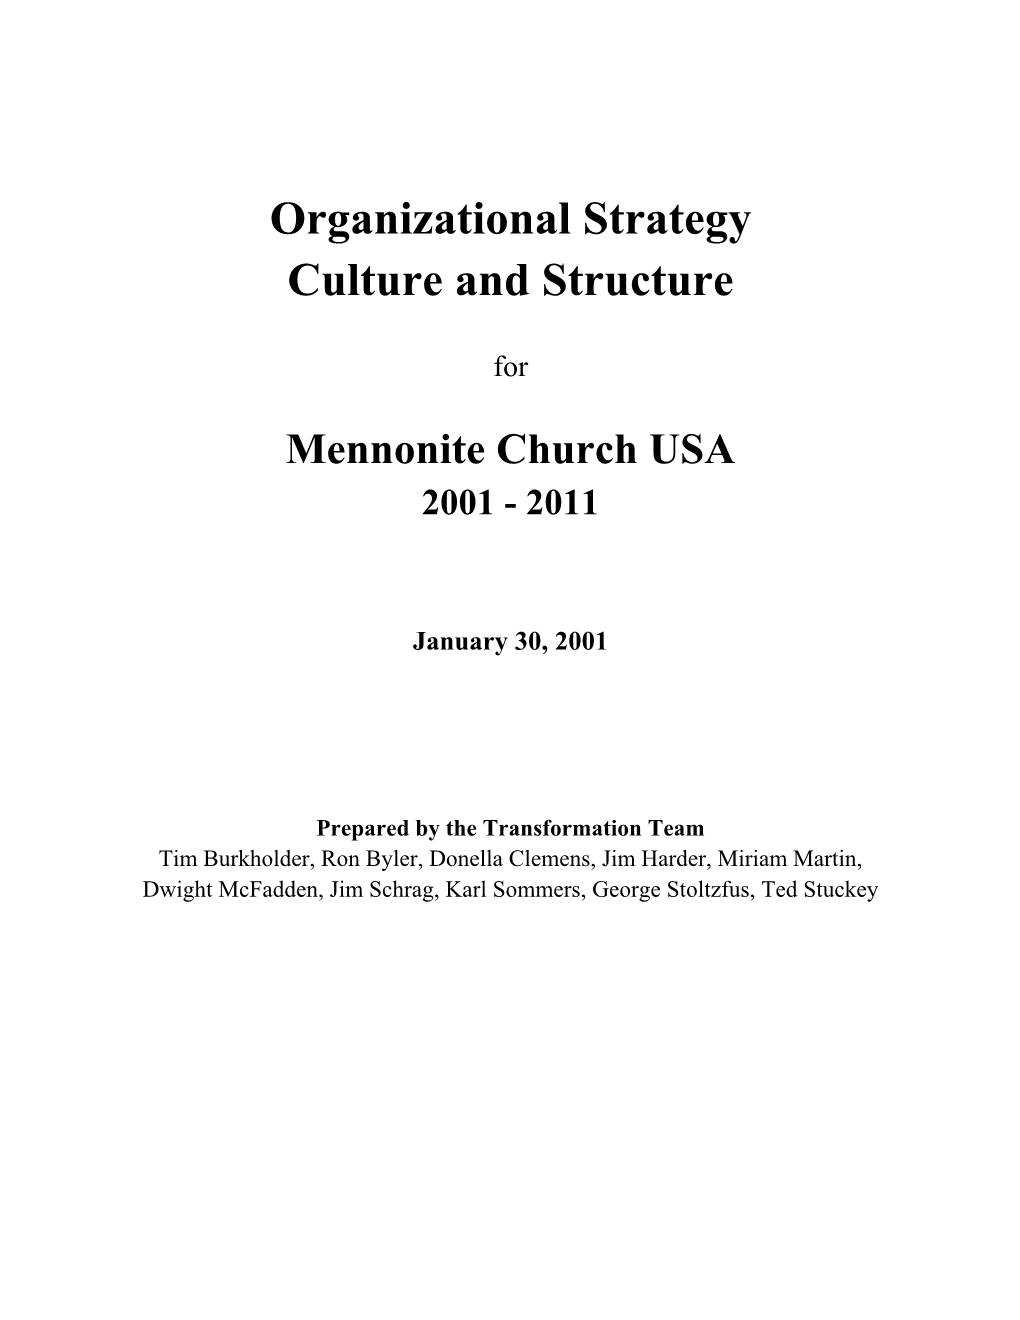 Organizational Strategy Culture and Structure